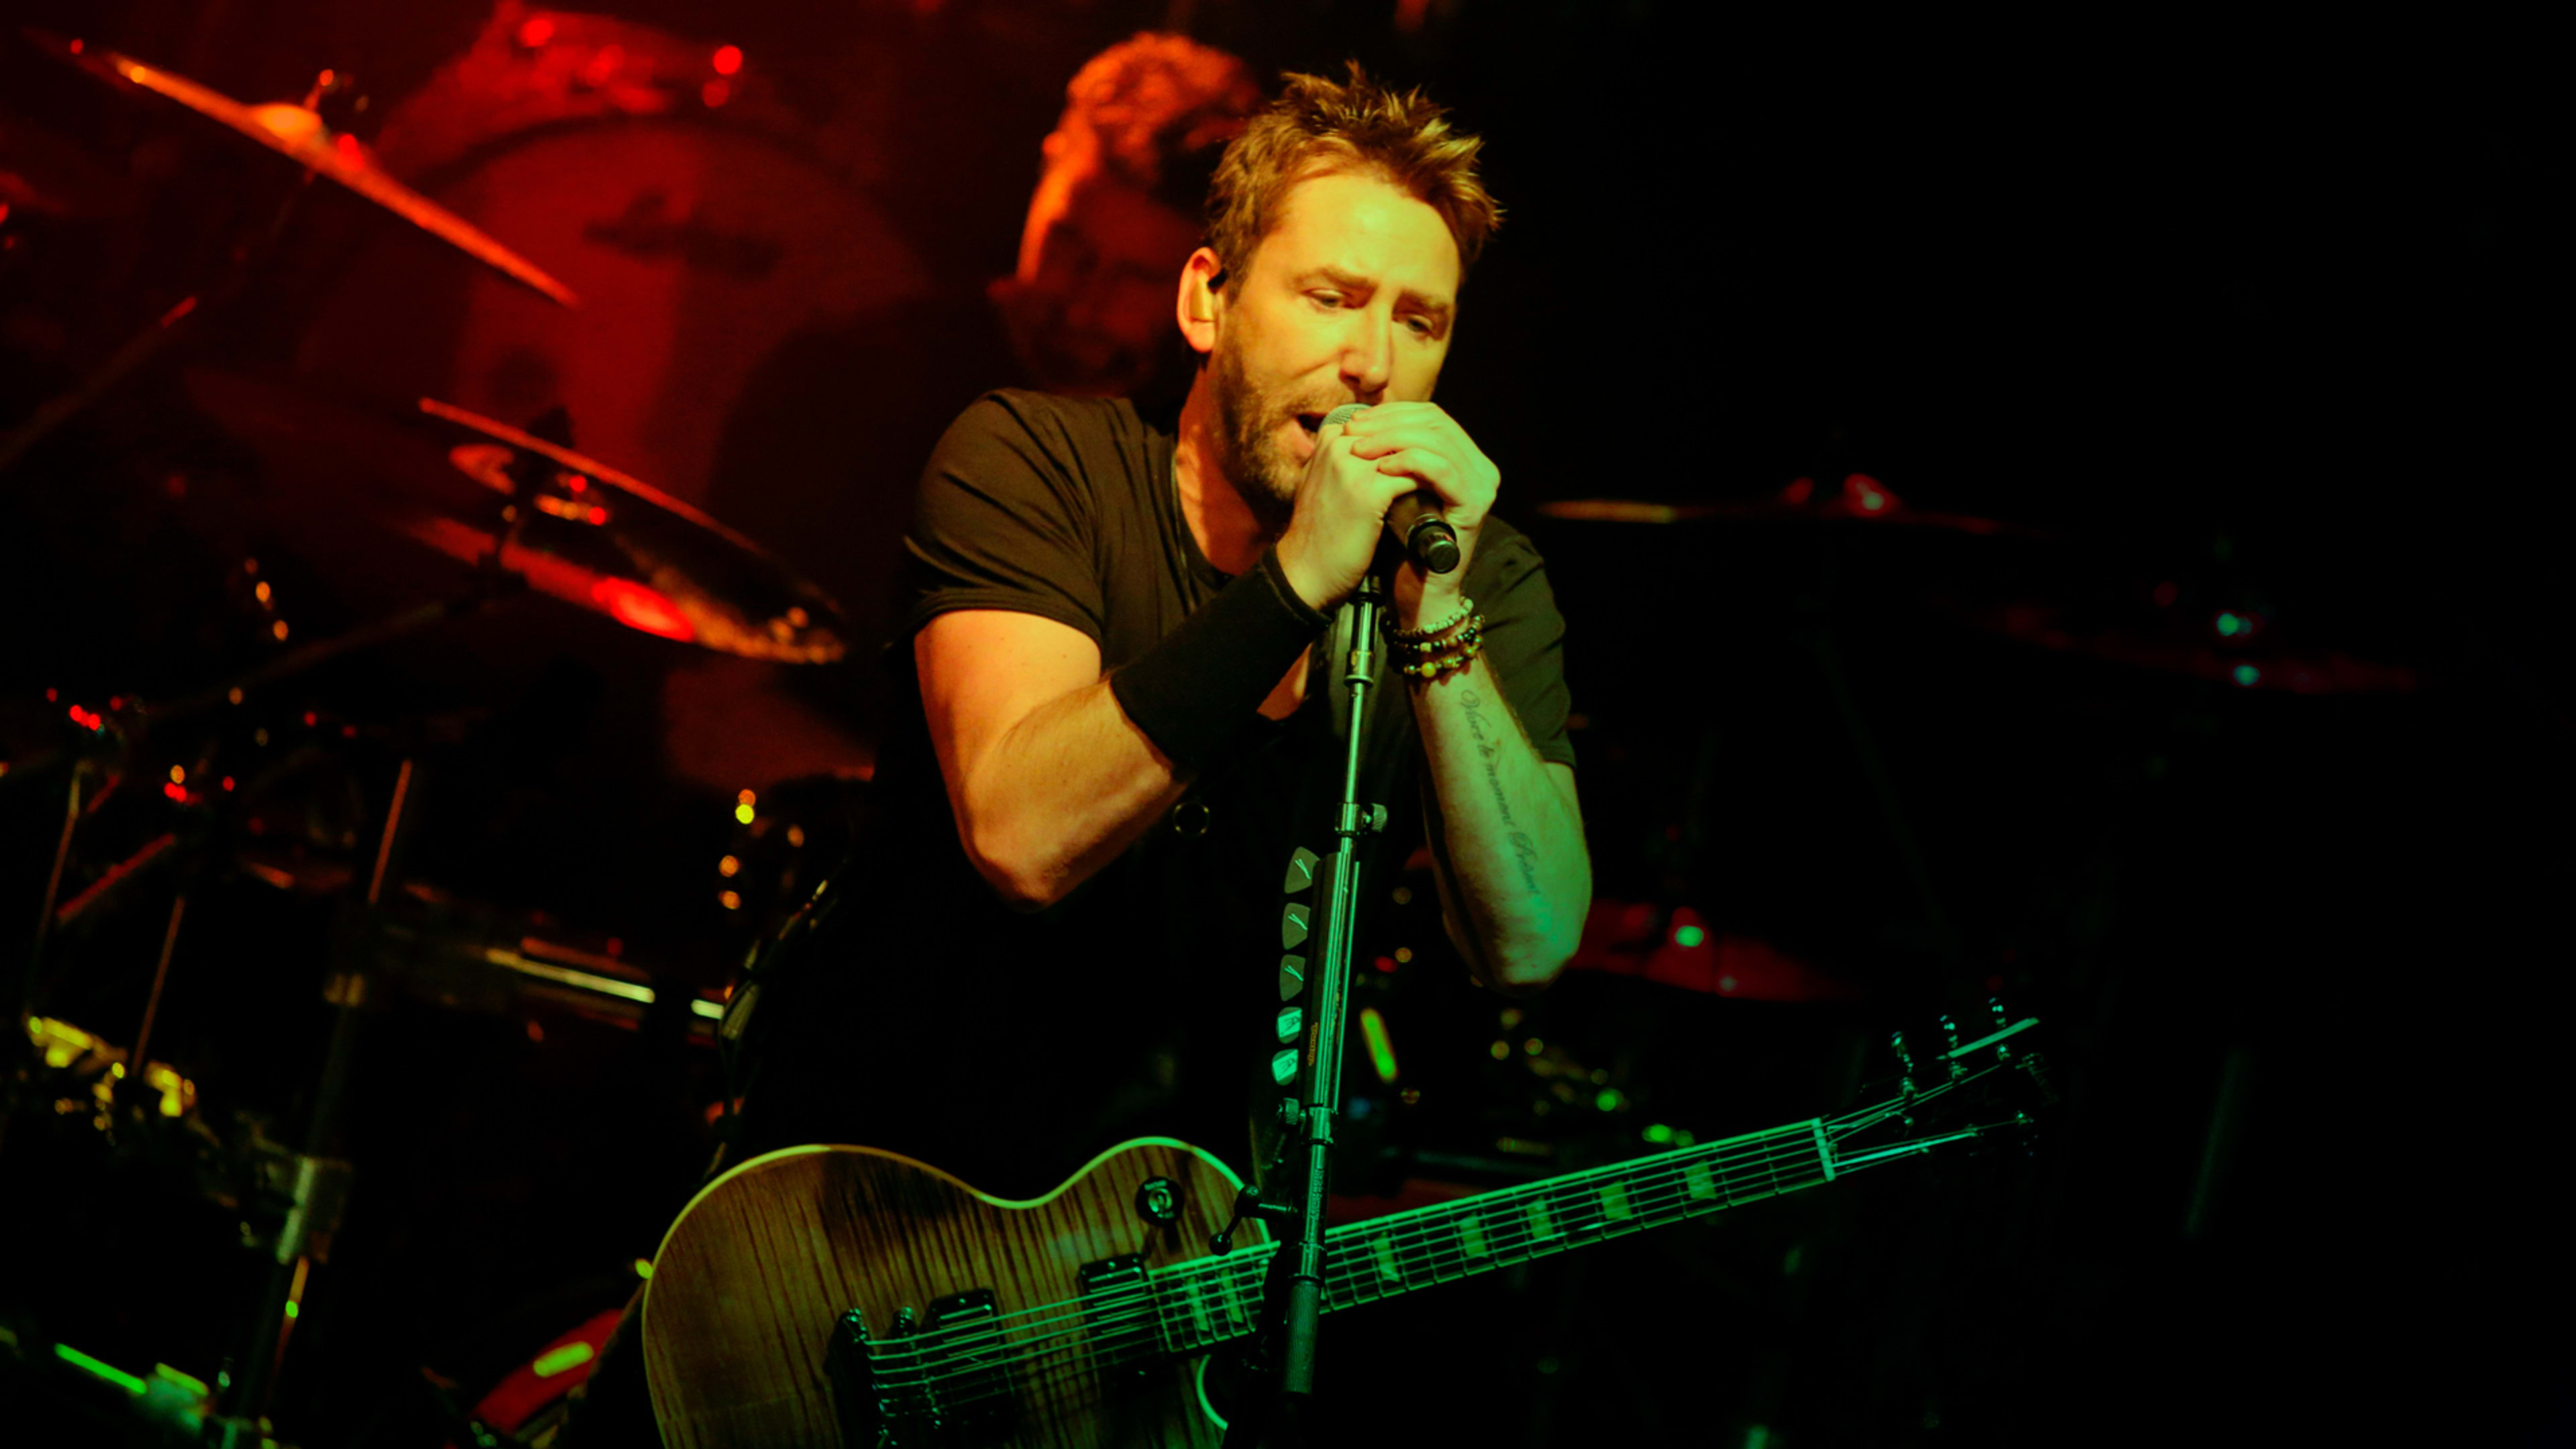 This is how Nickelback reminds Trump what he really is (an unpopular president)